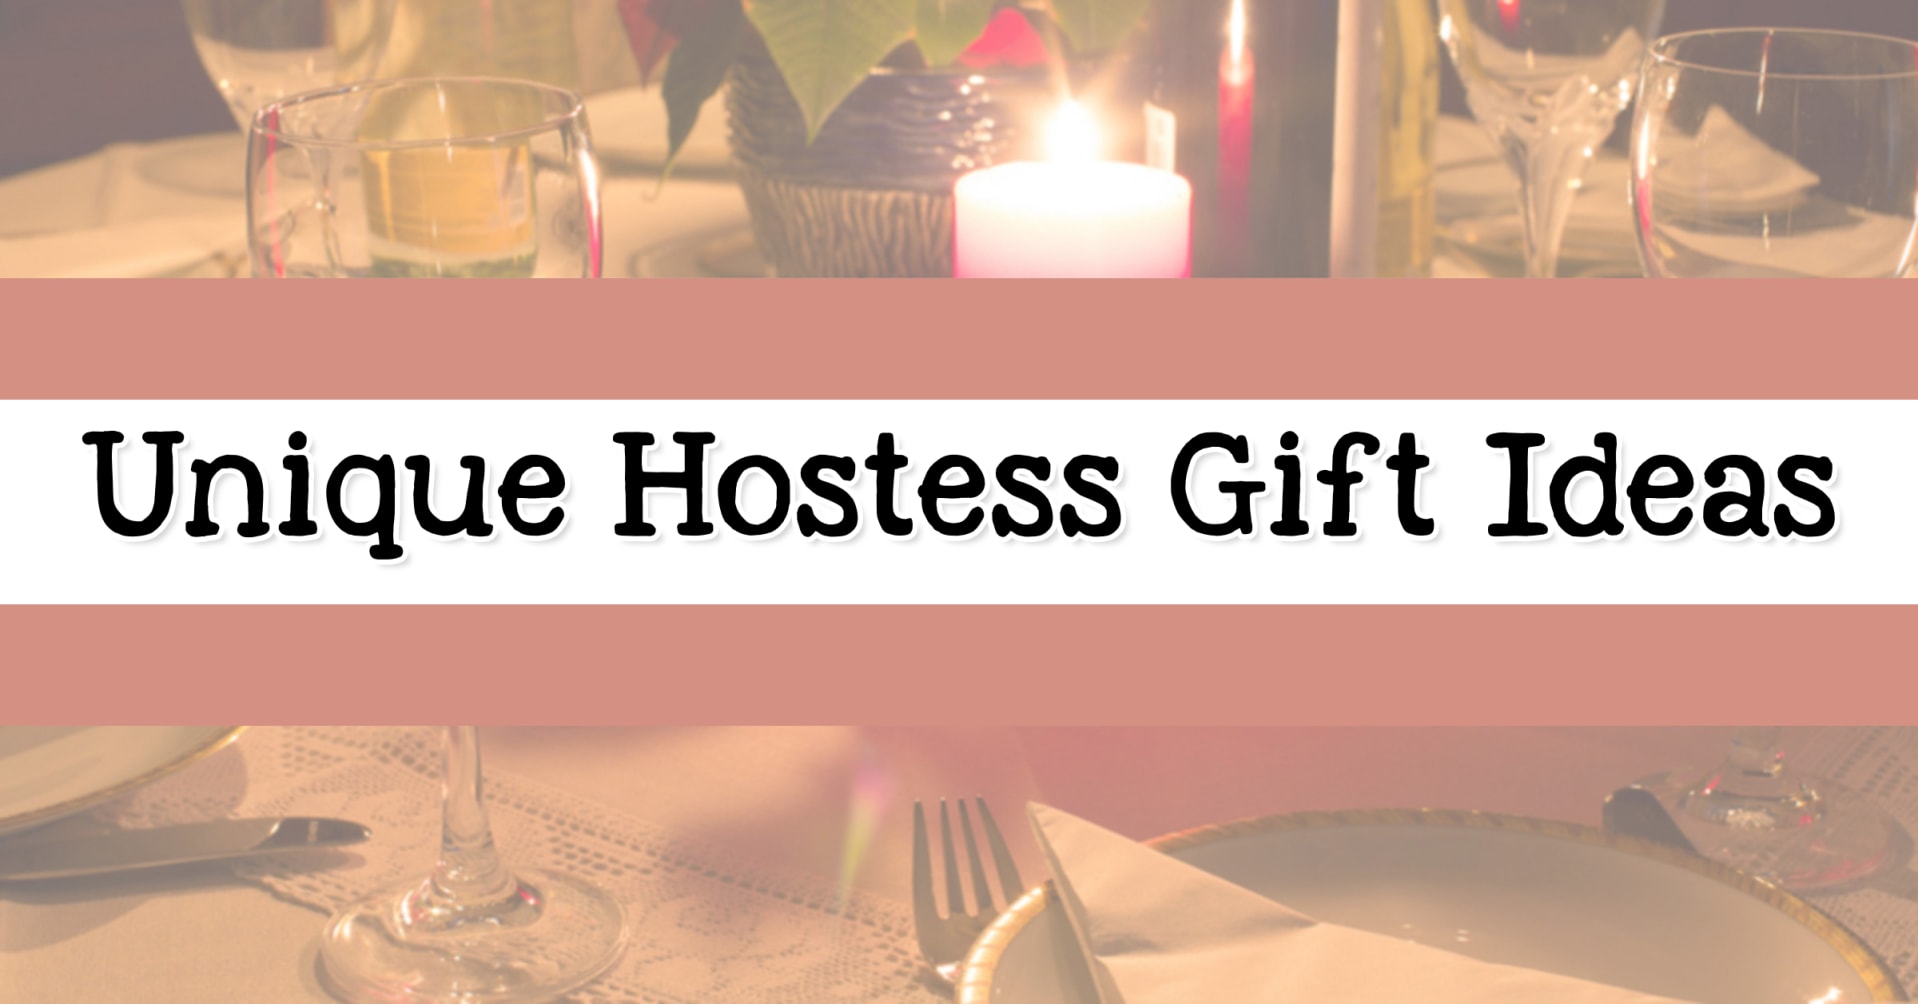 Hostess Gifts - best inexpensive hostess gifts and homemade hostess gifts - luxury hostess gifts, personalized hostess gifts, hostess gifts for baby shower and hostess gift ideas for a houseguest.  These unique gifts to say thank you and houseguest thank you gift ideas are thoughtful ideas for bridal shower gifts, weekend guest gifts, Thanksgiving hostess gifts and dinner party hostess gifts.